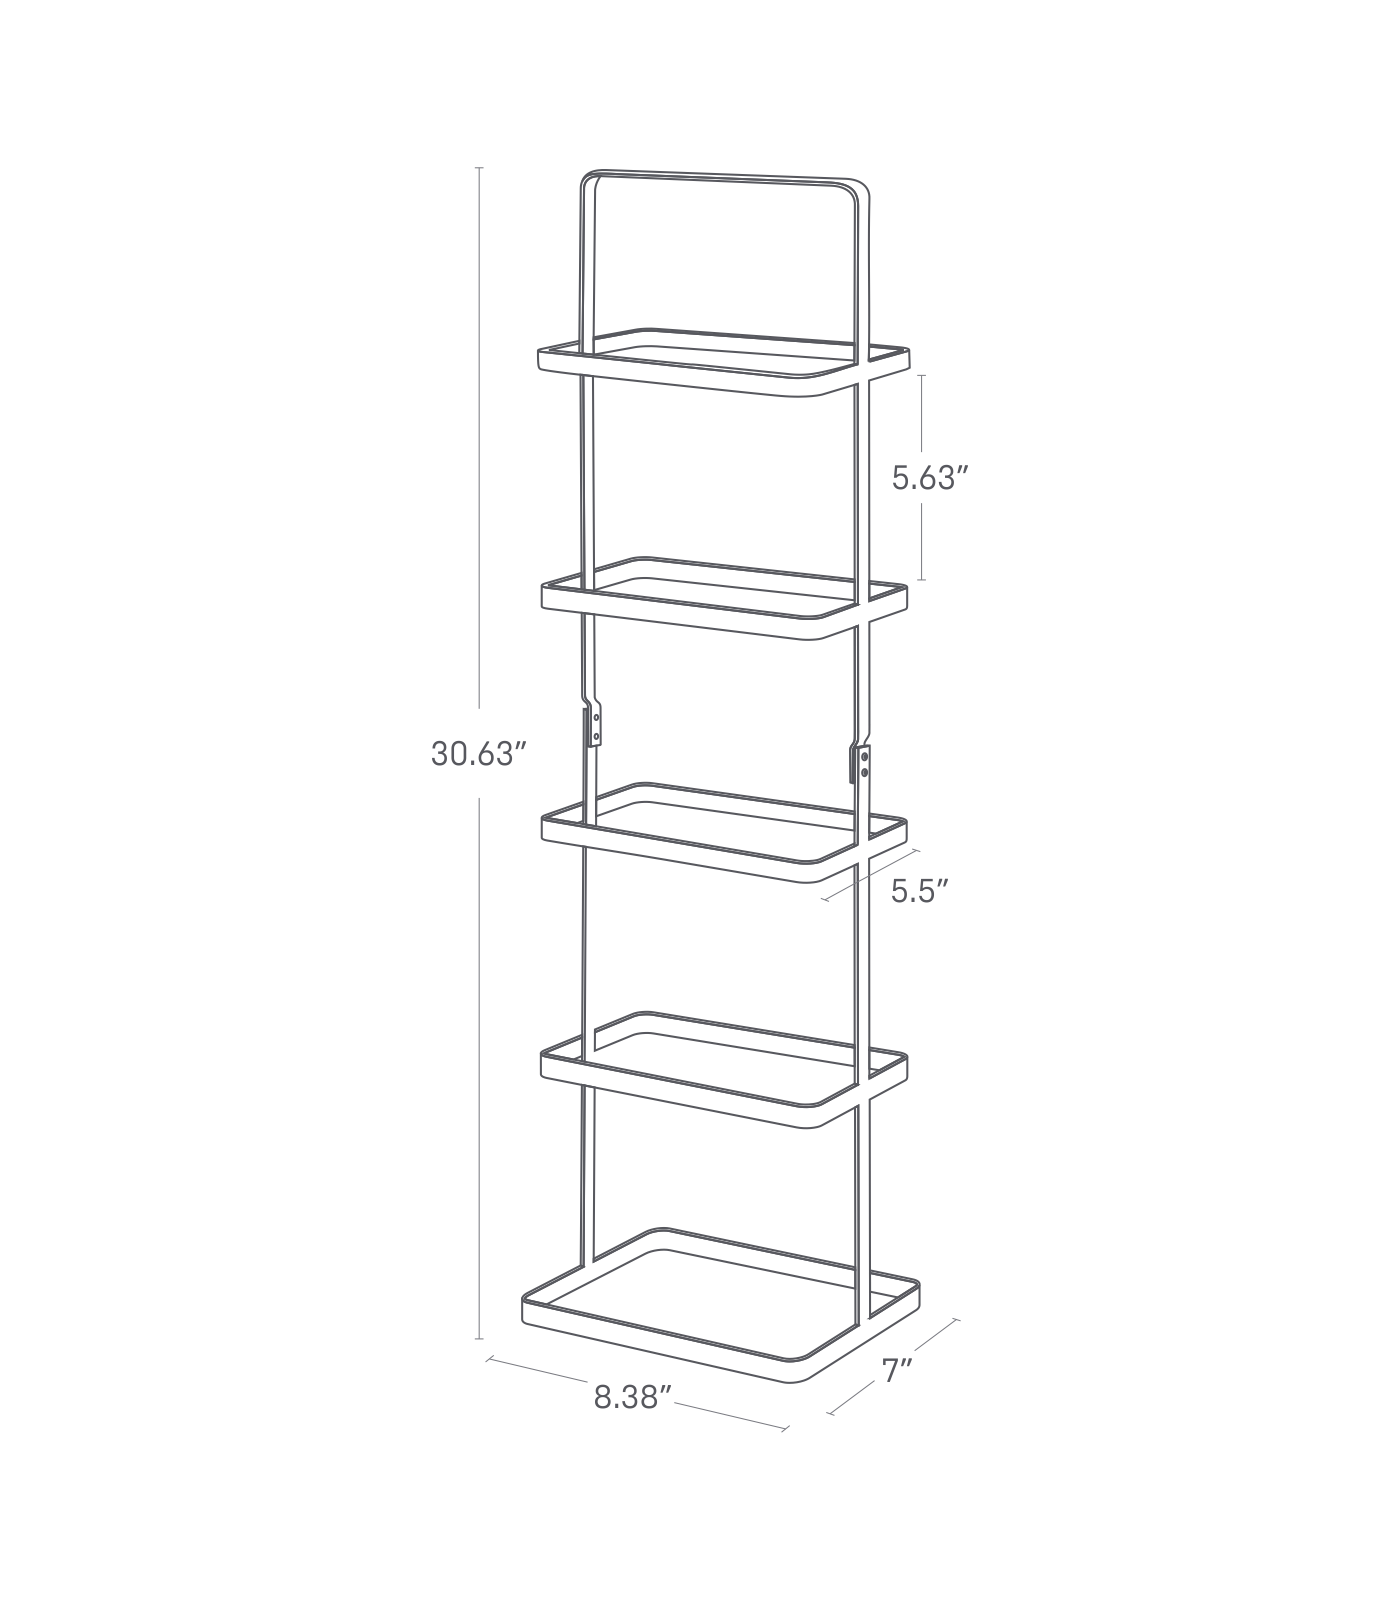 Dimension image for Shoe Rack - Two Styles on a white background including dimensions  L 7.09 x W 8.66 x H 30.51 inches